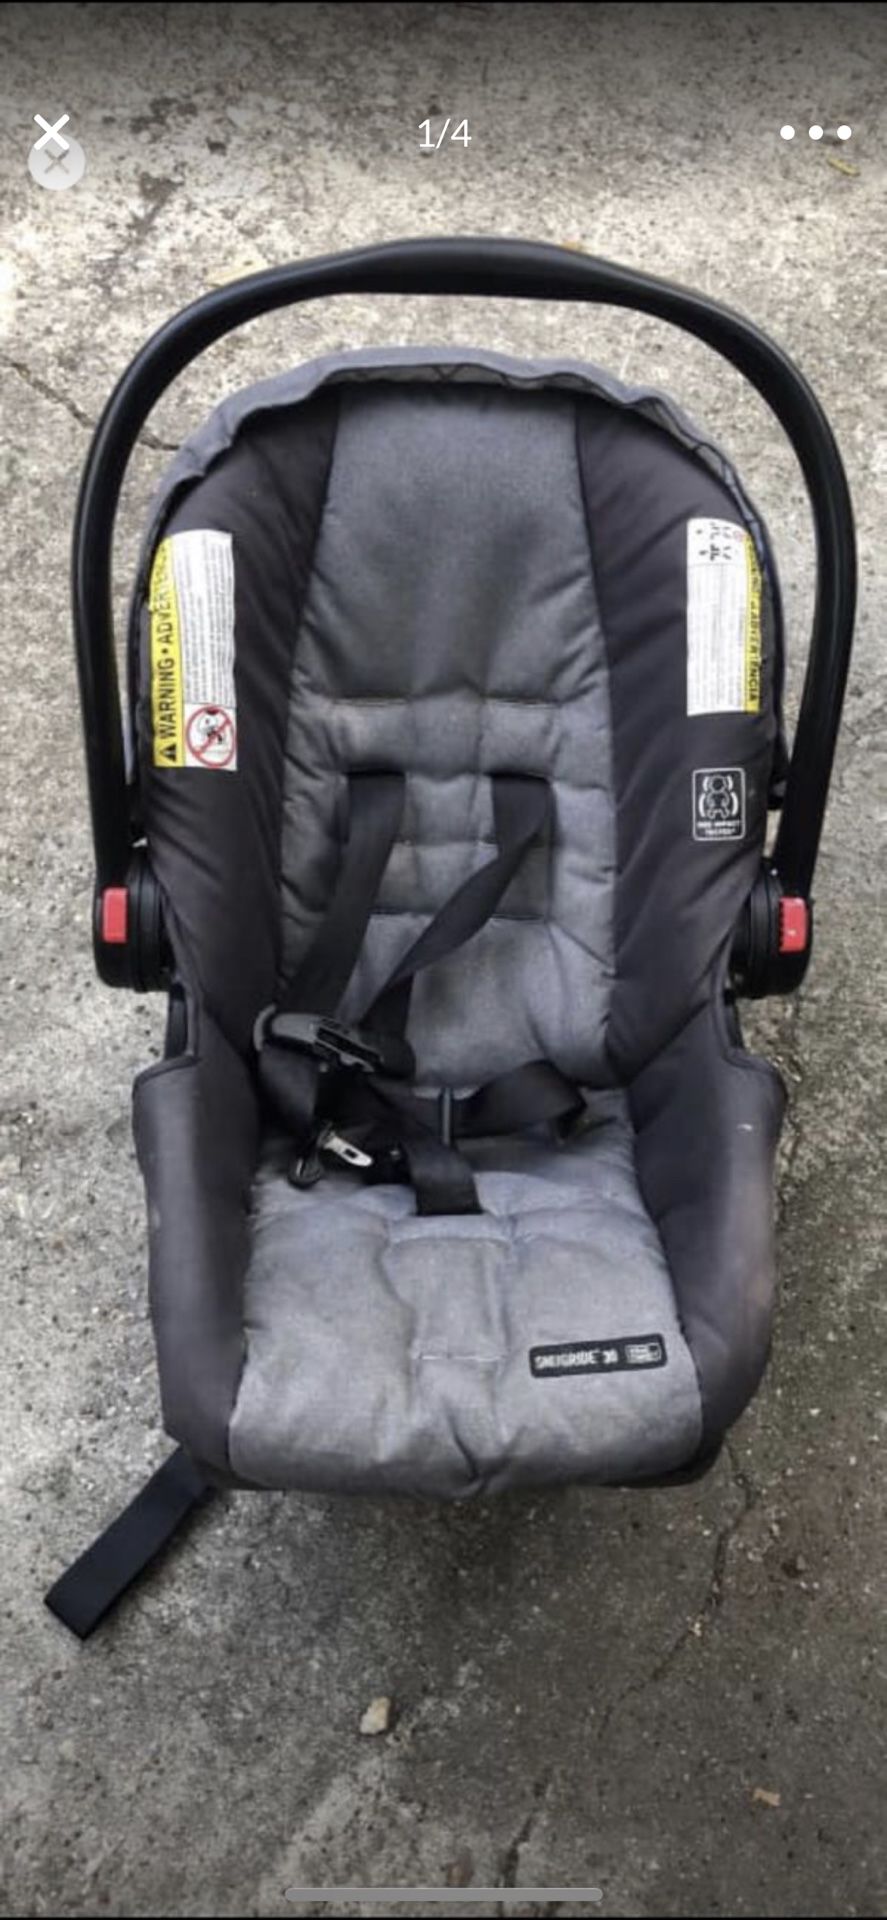 Graco car seat 1.5 year old